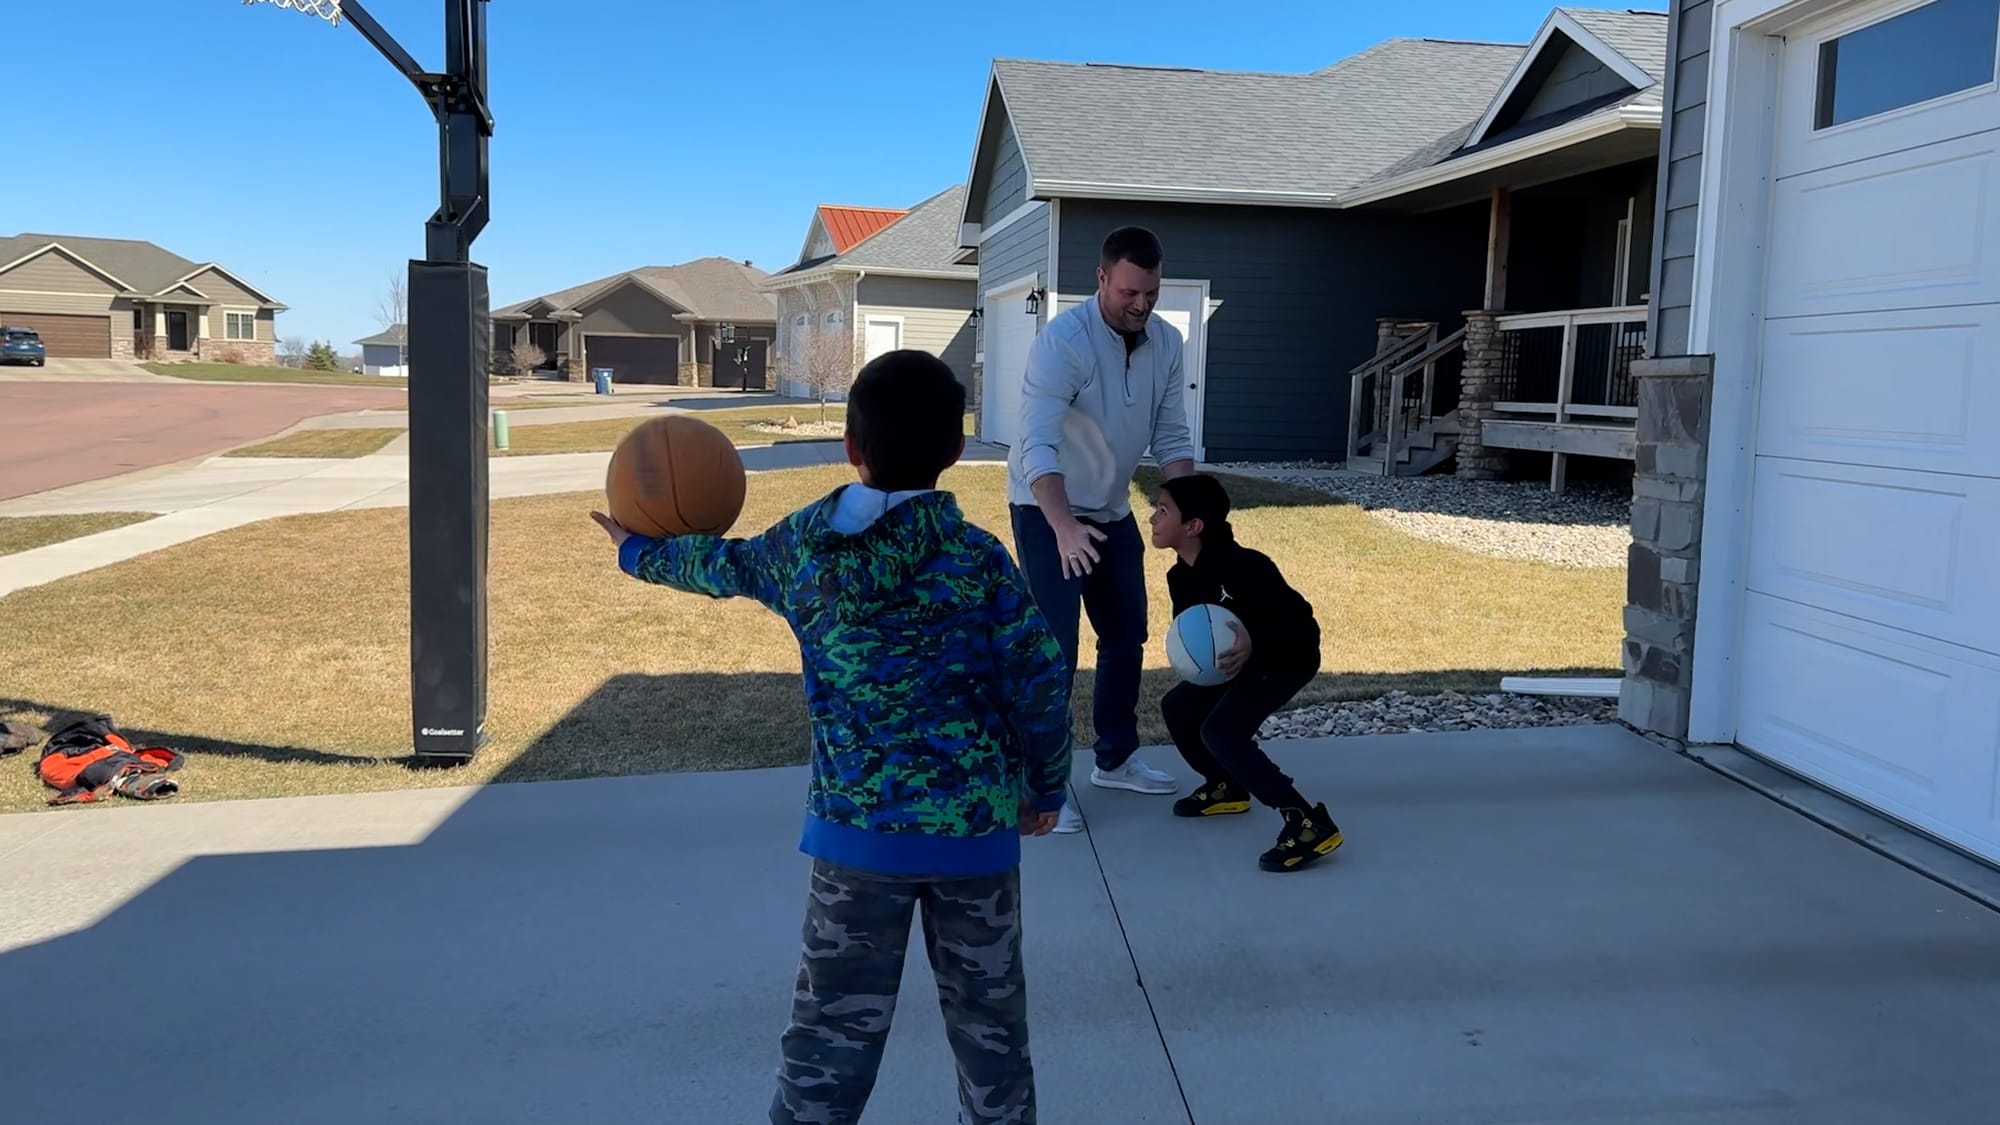 Scott Louwagie plays basketball with his two sons, both adopted from foster care, outside their home in Sioux Falls, S.D. 